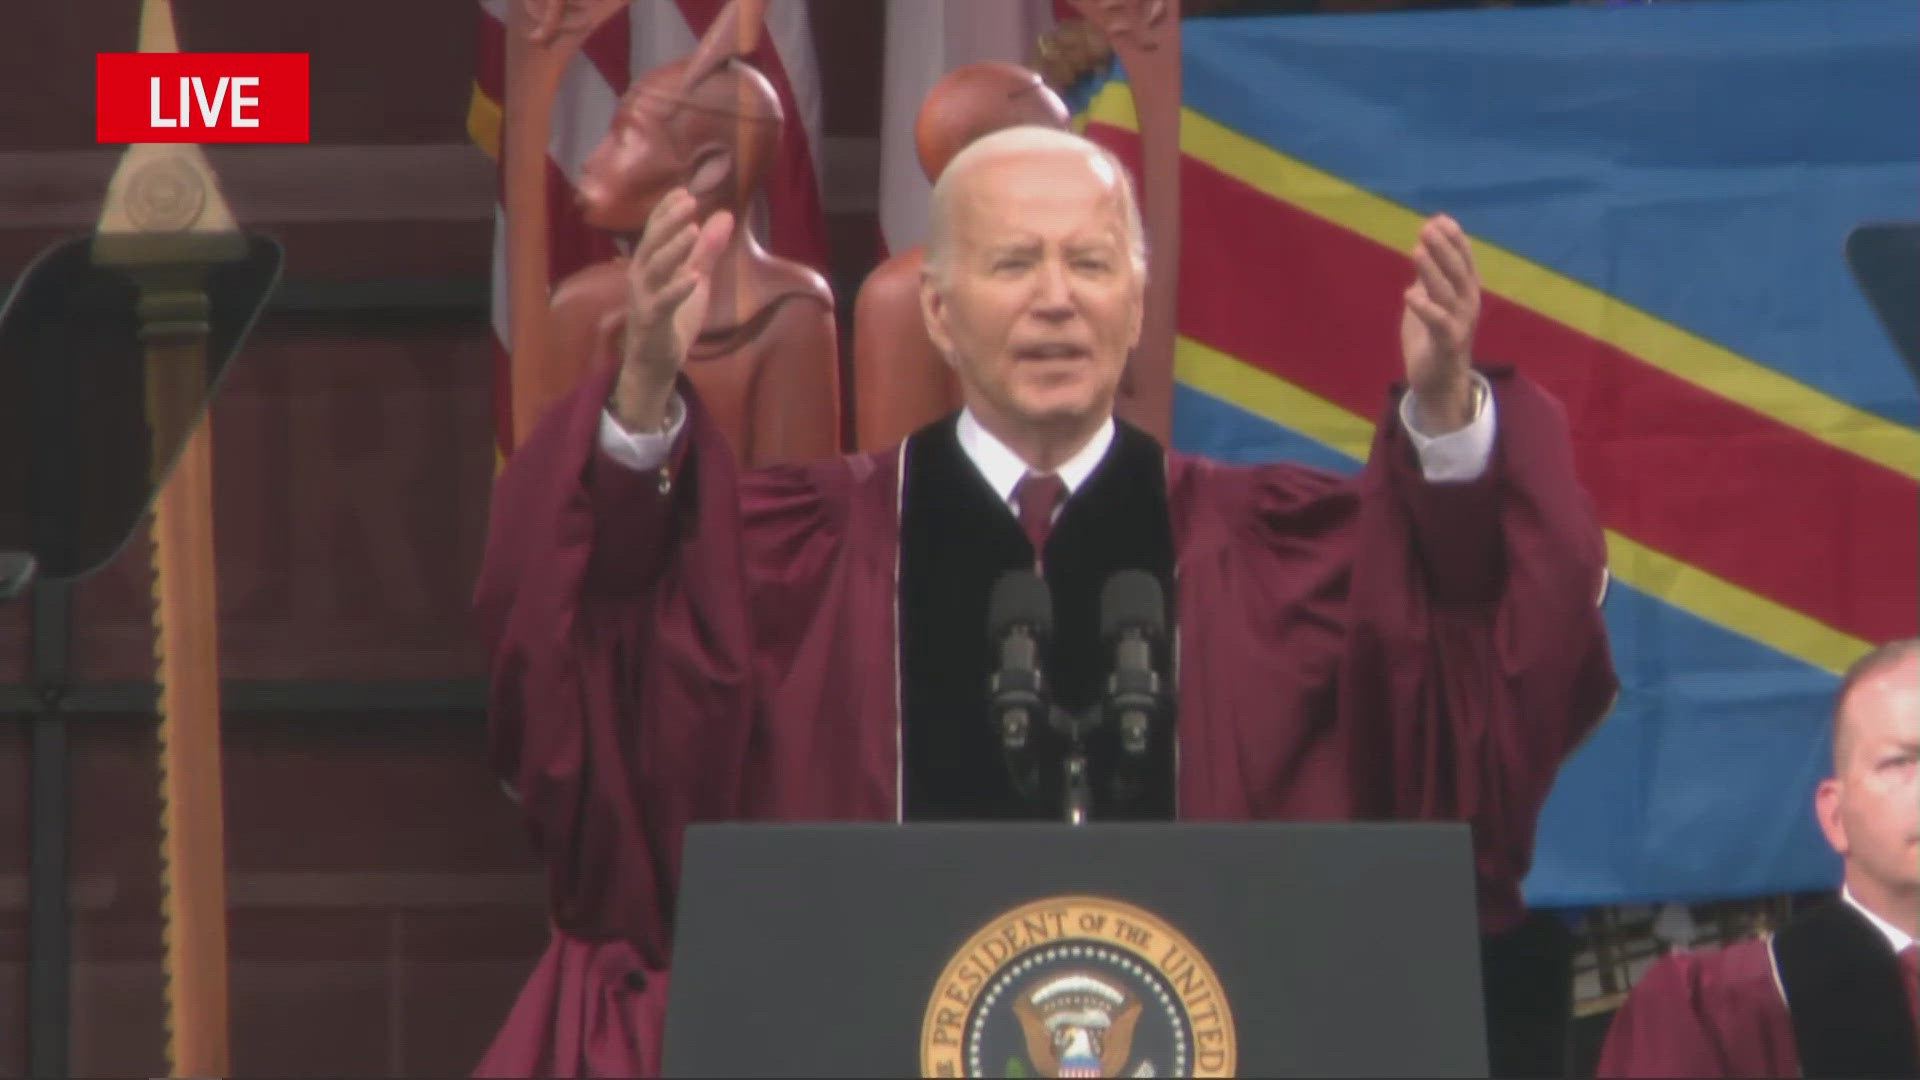 President Joe Biden delivered the commencement address at Morehouse College on Sunday, a key opportunity for an election-year appearance before a Black audience.